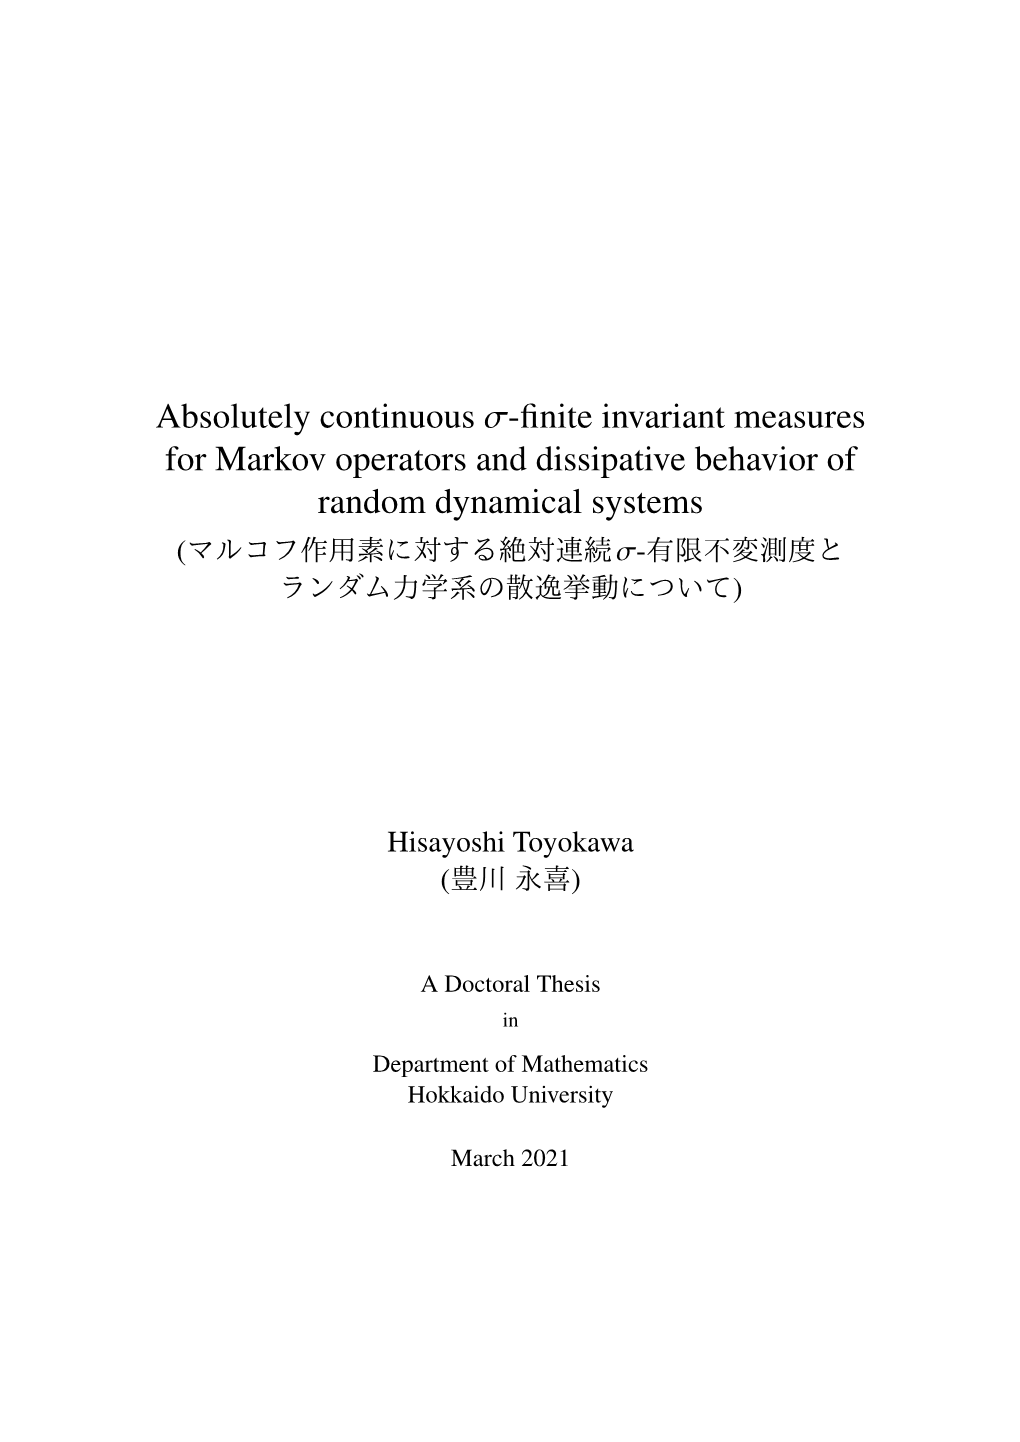 Absolutely Continuous Σ-Finite Invariant Measures for Markov Operators and Dissipative Behavior of Random Dynamical Systems